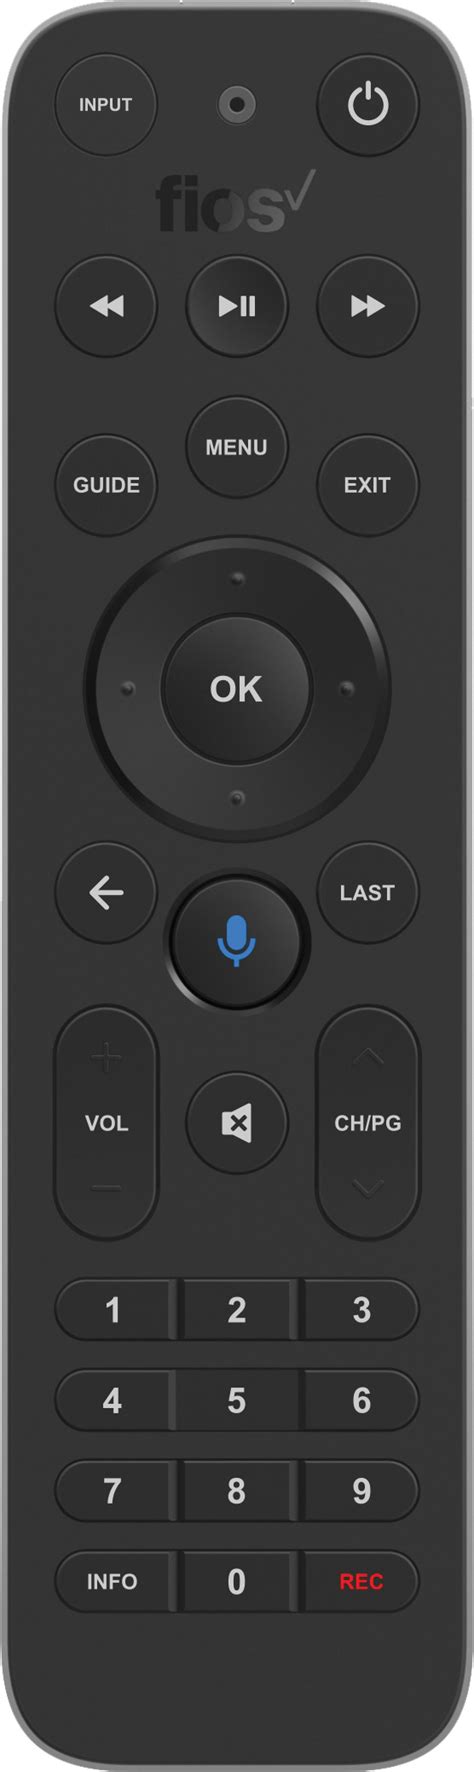 How to program your remote control. Please read all instructions before starting. Turn on your TV and Fios Set-top box; Locate the 3-digit TV code for your TV. Press the OK and 0 buttons at the same time.The red light on the remote will blink twice and stay on. Next, enter the 3-digit TV code.The red light will blink twice and then stay on. ...